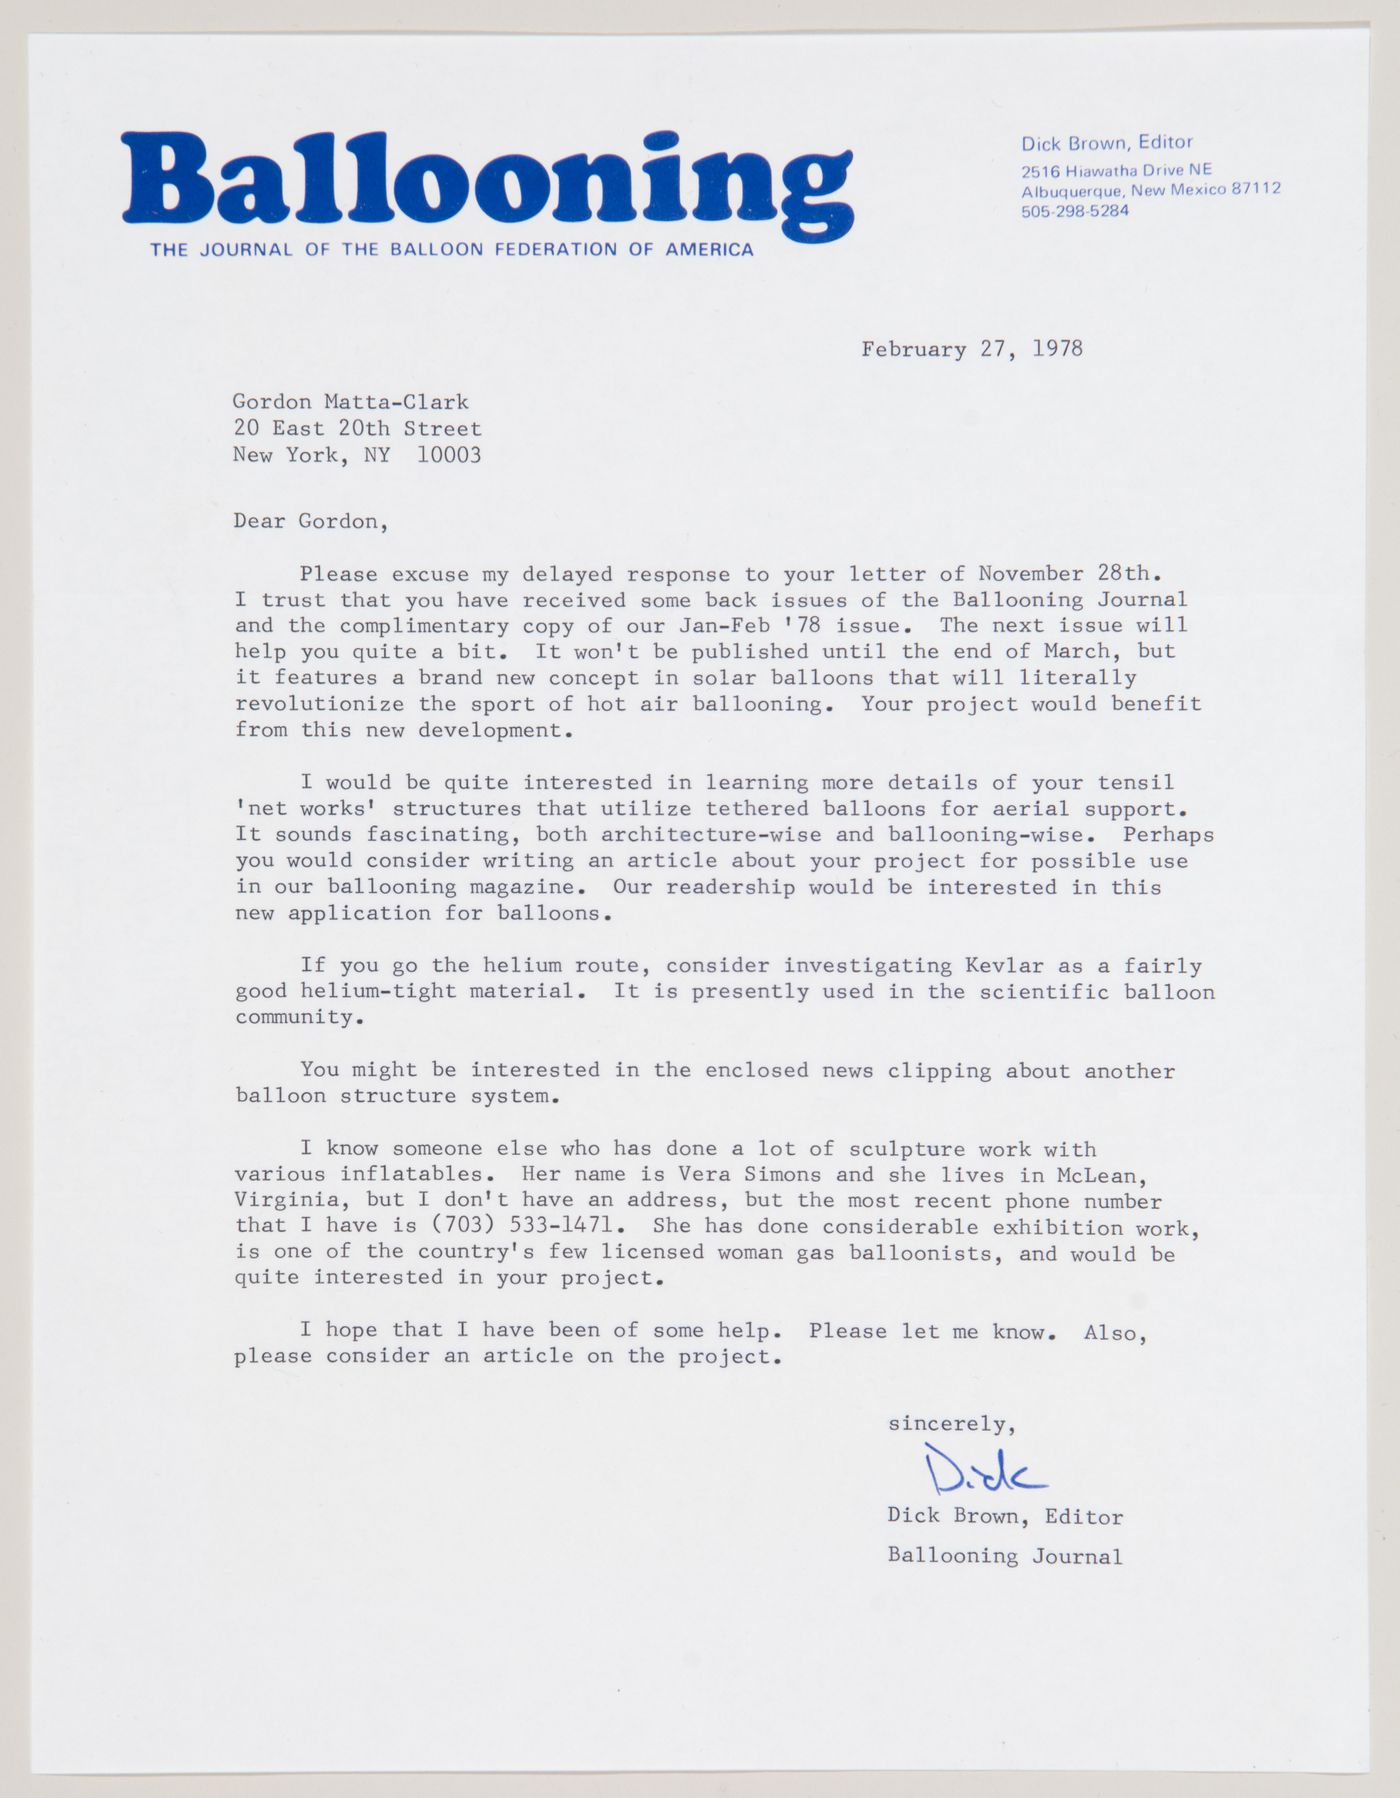 Letter from Dick Brown to Gordon Matta-Clark, news clipping about a balloon structure system and subscription form to the journal 'Ballooning'